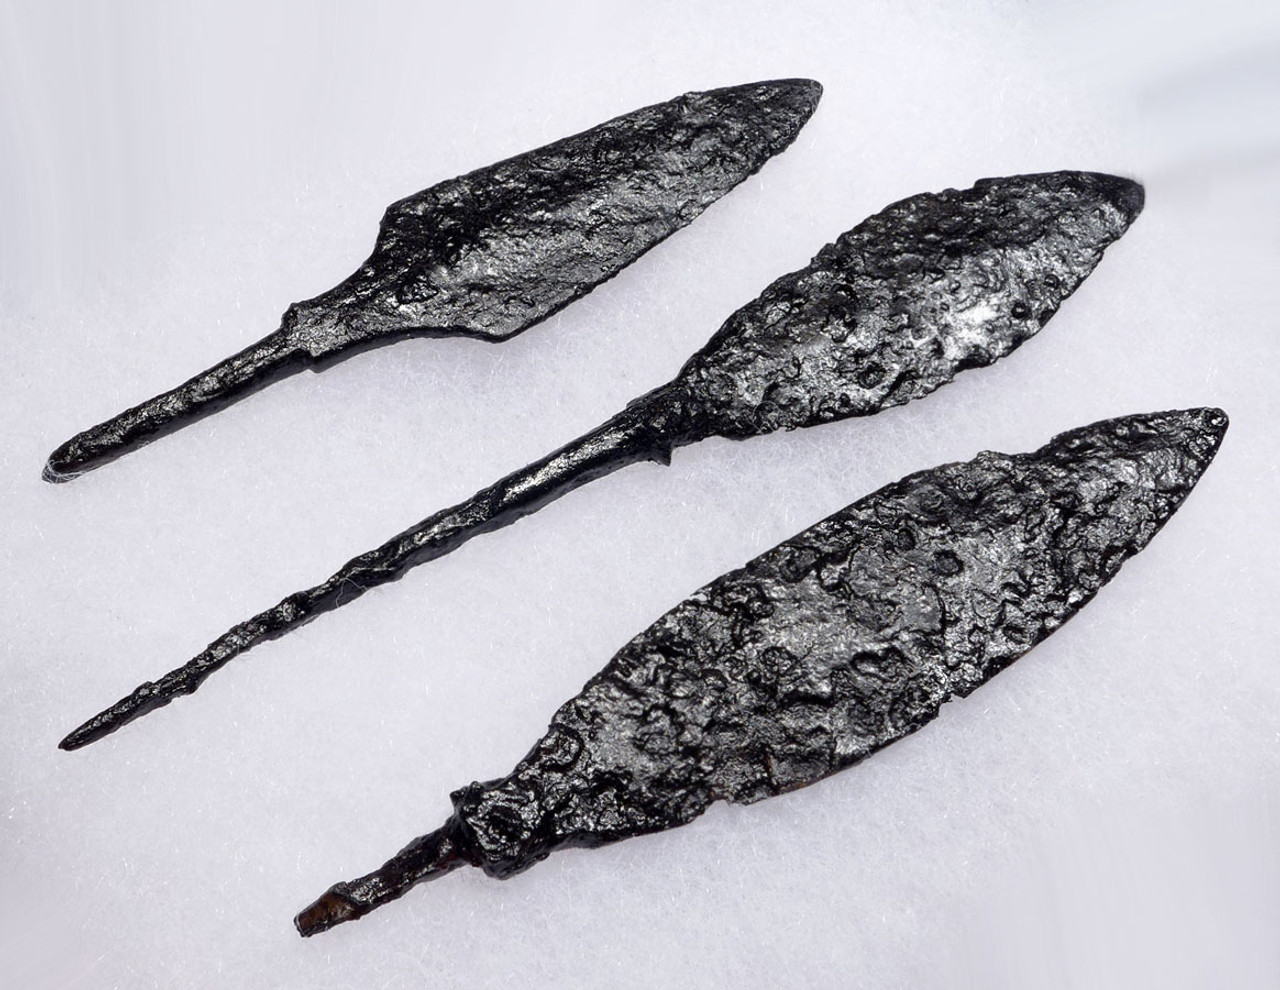 EXCELLENT SET OF 3 LARGE ANCIENT ROMAN IRON ARROWHEADS FROM THE BYZANTINE ERA *R179